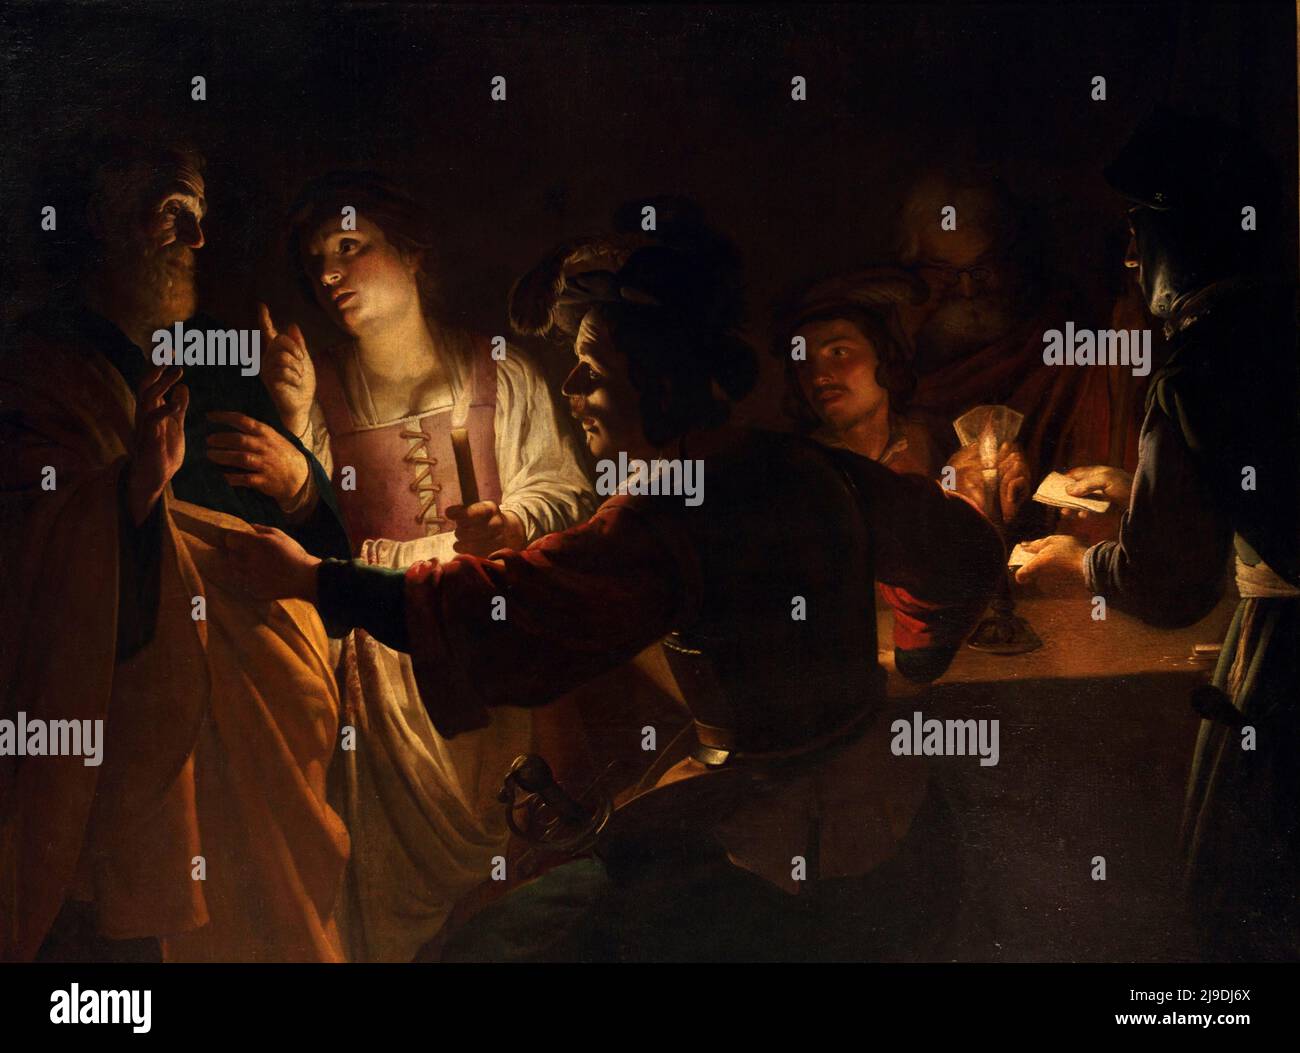 The Denial of Saint Peter by Gerard van Honthorst. This painting depicts the scene where, after the arrest of Jesus, St Peter denies knowing him when being confonted by the by the authorities. Stock Photo